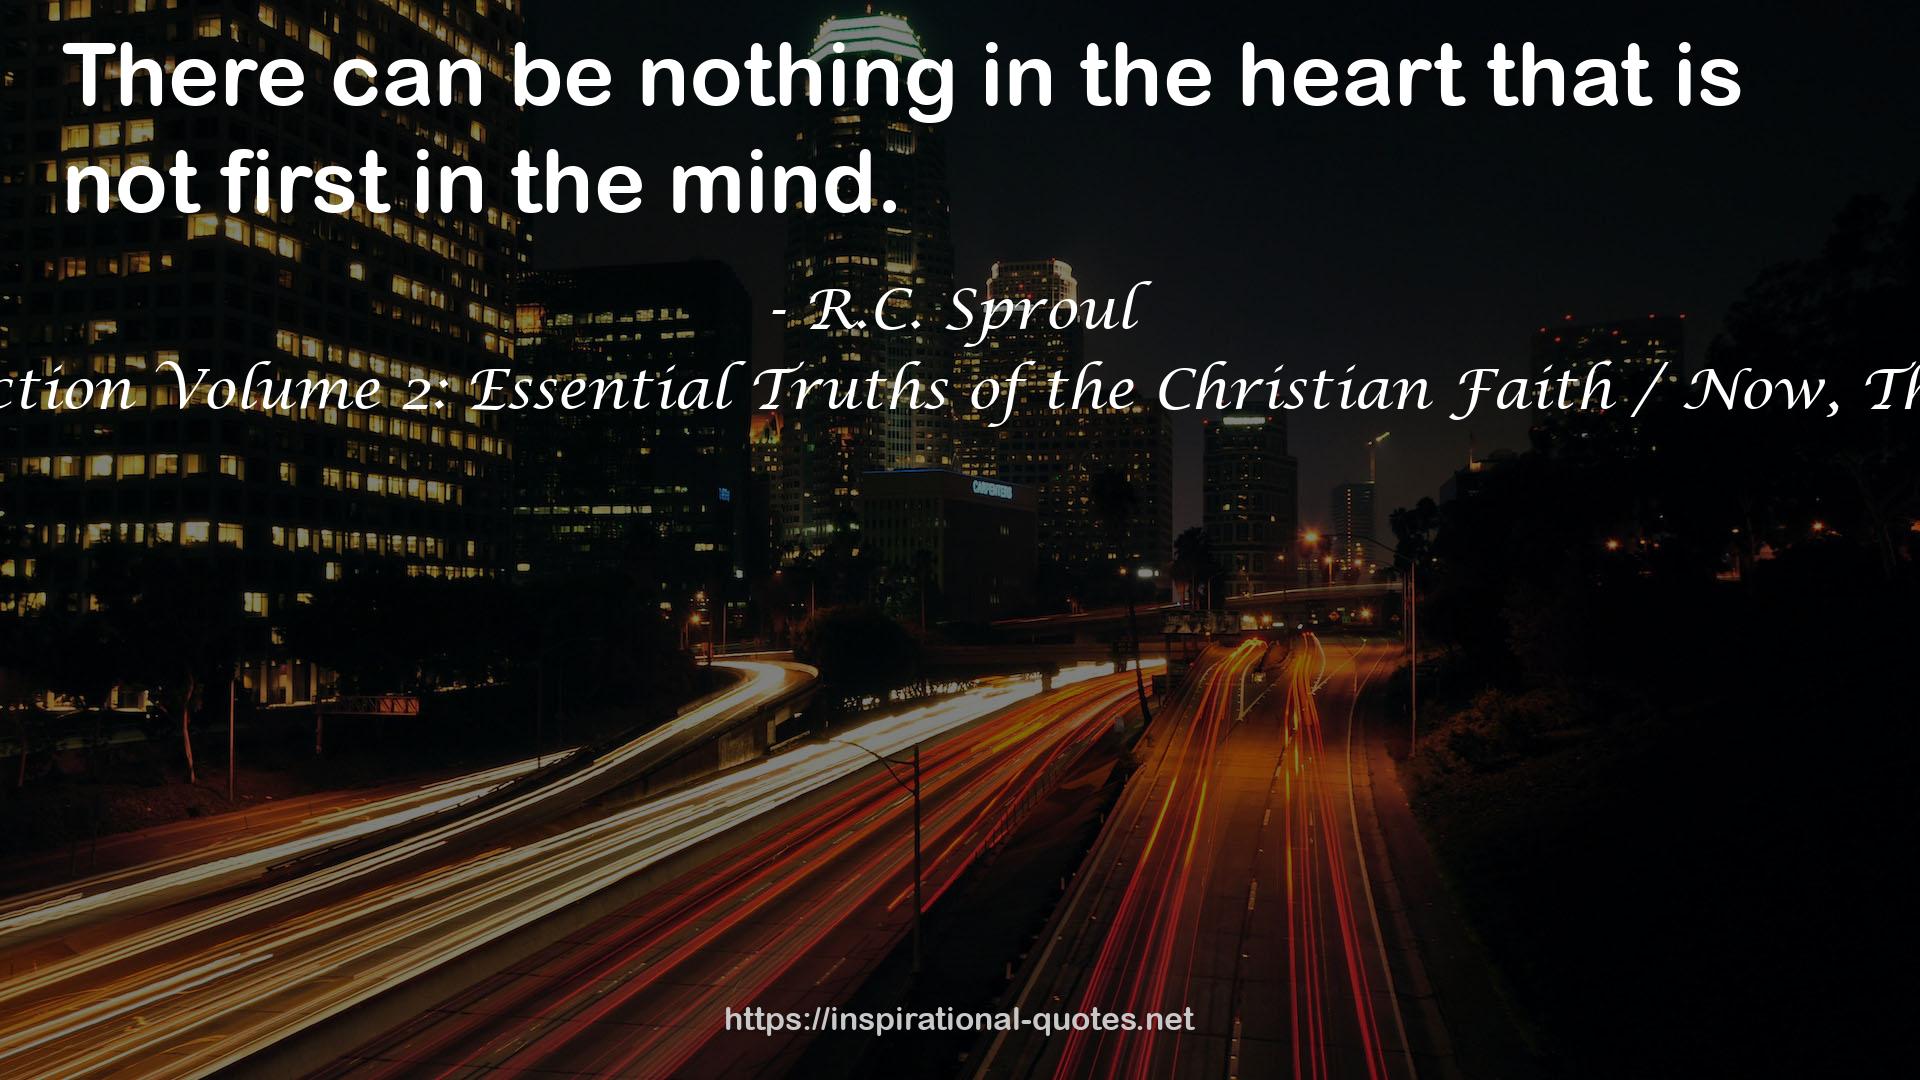 The R.C. Sproul Collection Volume 2: Essential Truths of the Christian Faith / Now, That's a Good Question! QUOTES